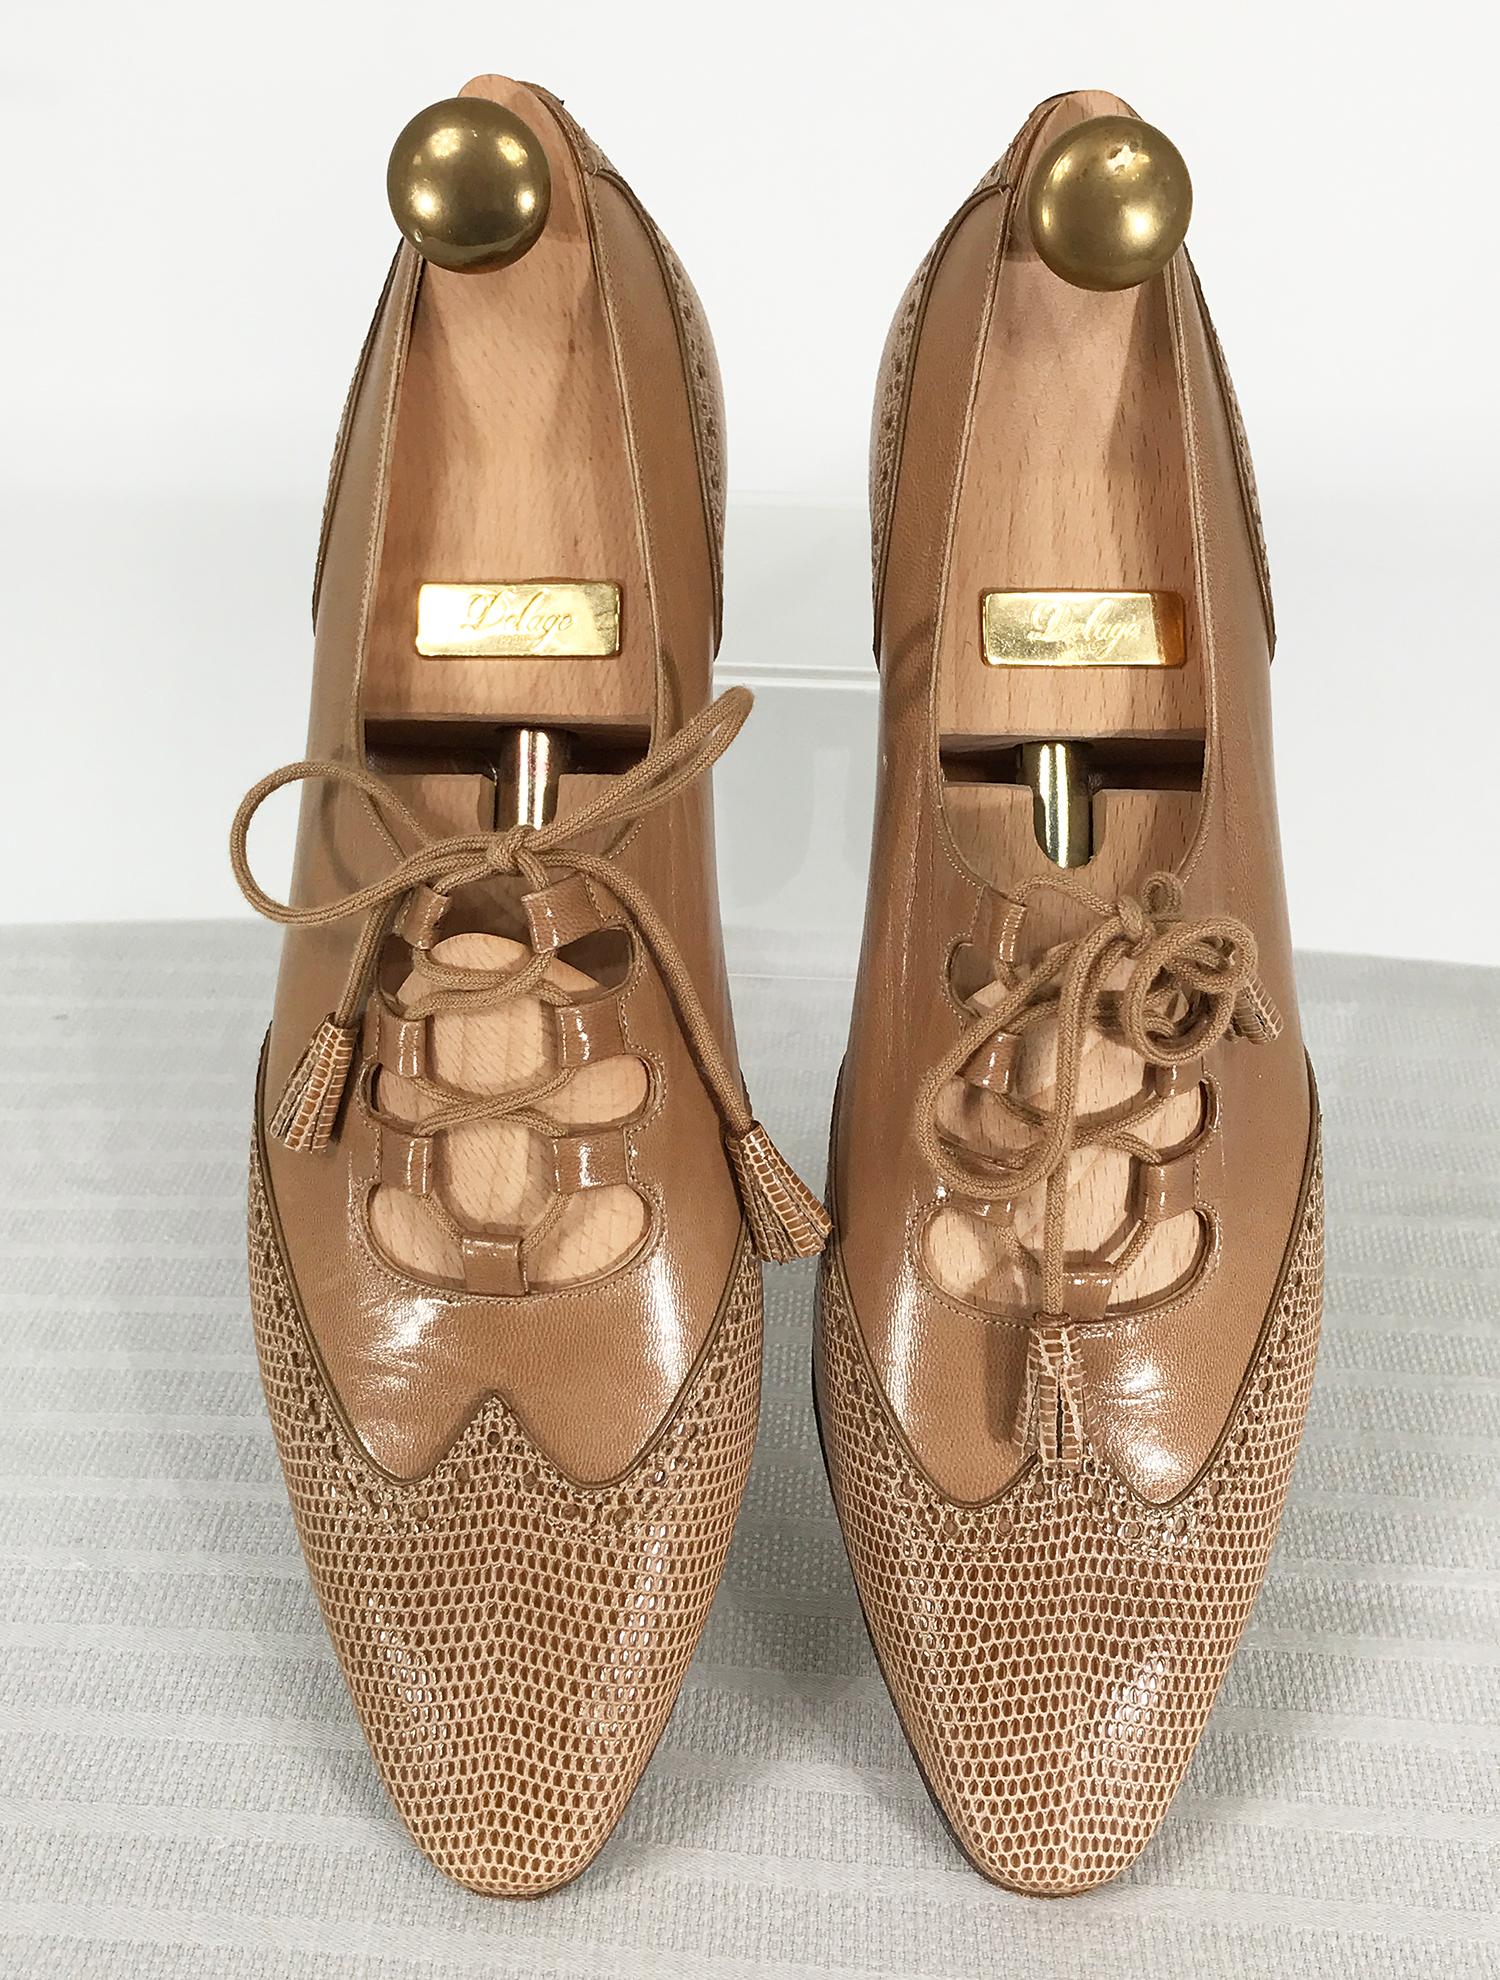 Delage, Paris, Picasso tan lizard & leather lace up, chunky heel shoes marked size 39 1/2. These beautiful shoes are in excellent condition with little wear. Leather soles and lining. Together with the custom shoe trees. Heels are 1 3/4 inches high.